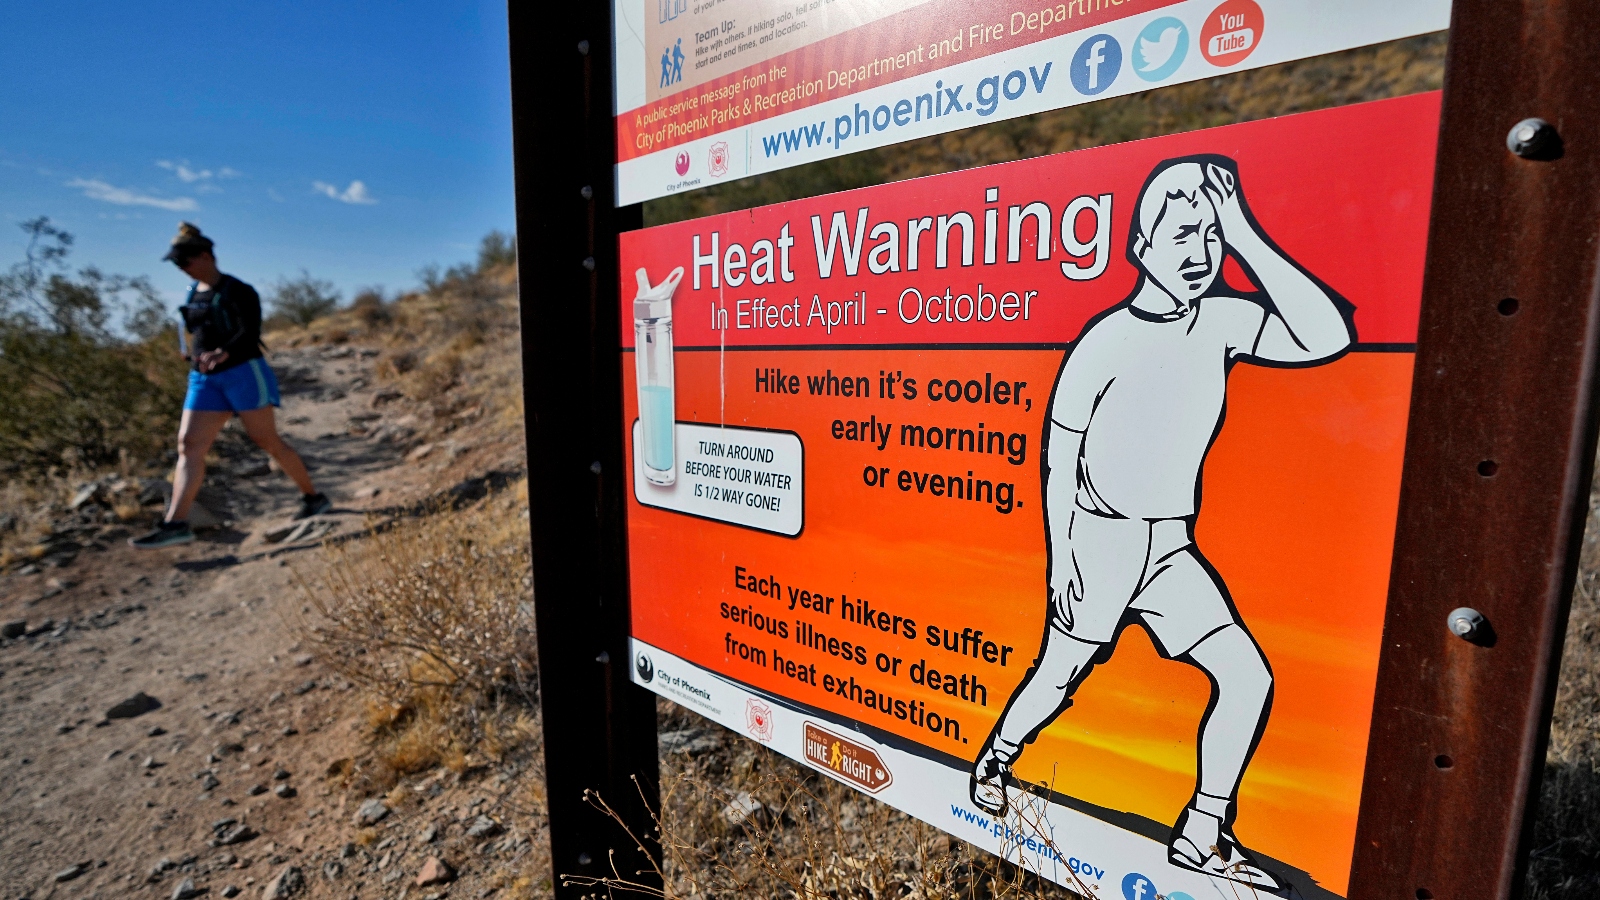 A hiker finishes her hike early to beat high temperatures on Monday, July 10, 2023 in Phoenix. The city experienced 110 degree F temperatures for a month straight this summer.